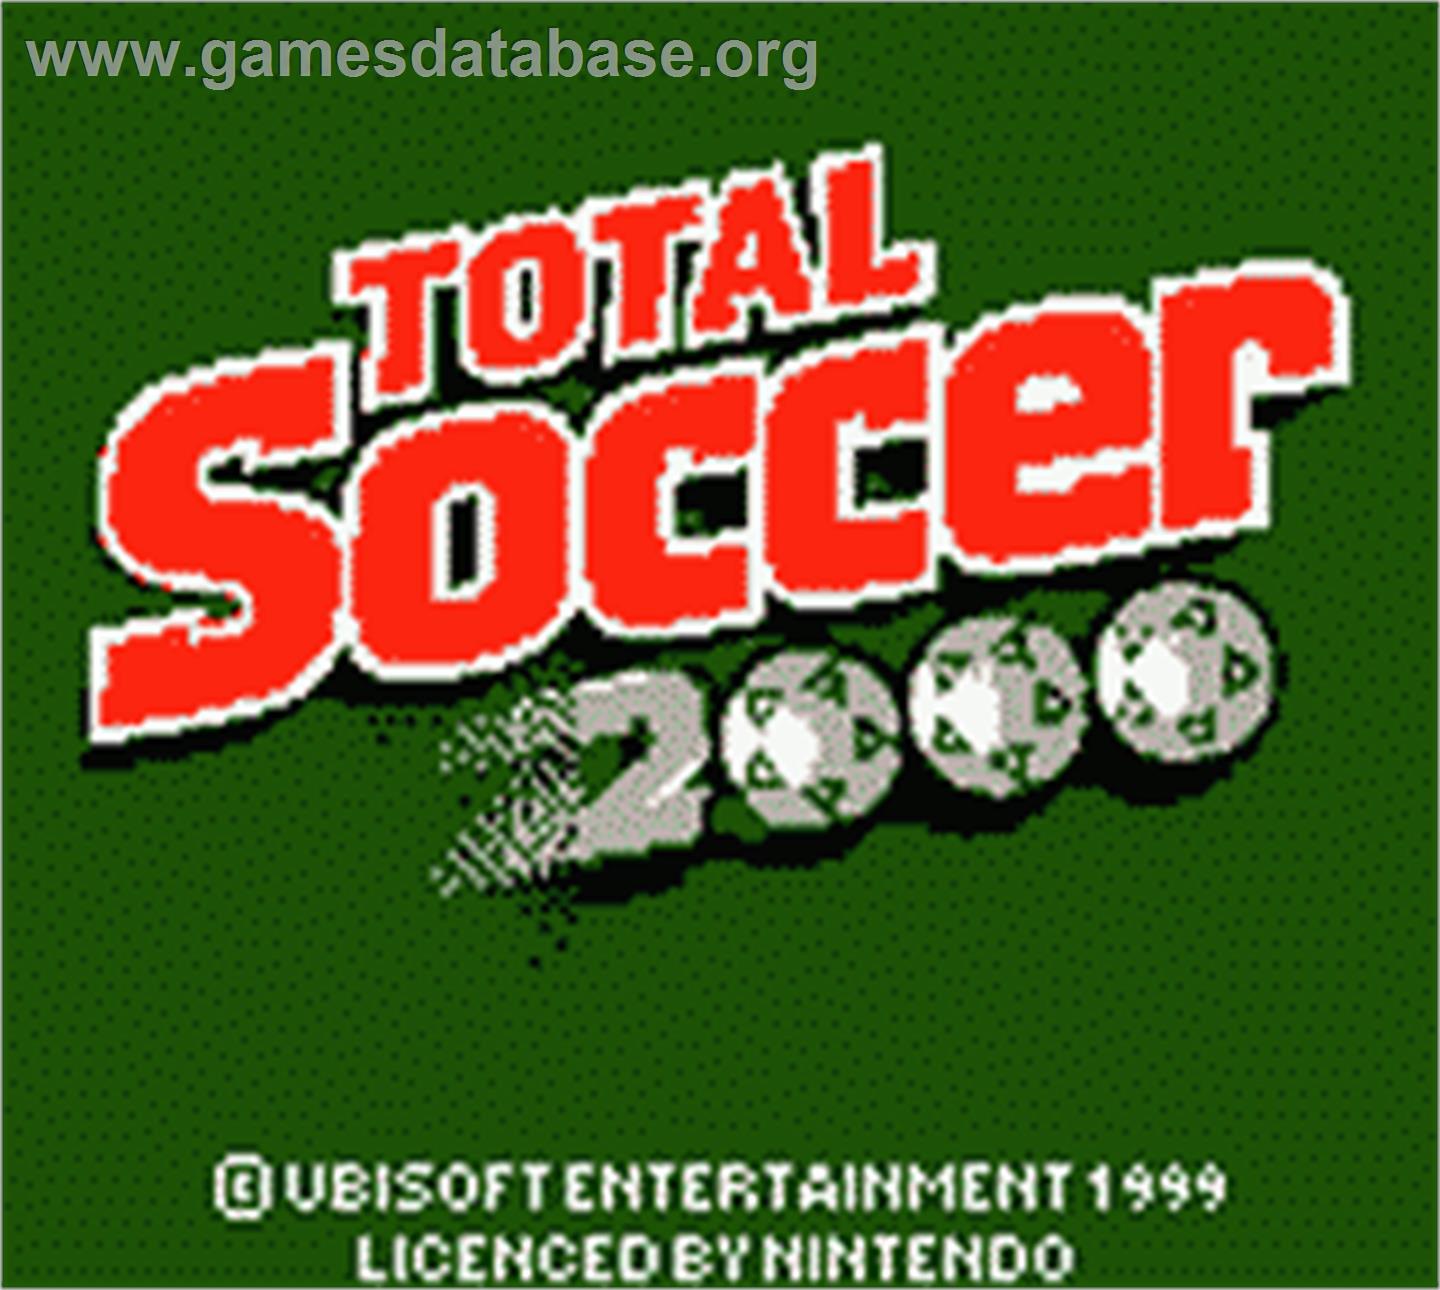 David O'Leary's Total Soccer 2000 - Nintendo Game Boy Color - Artwork - Title Screen